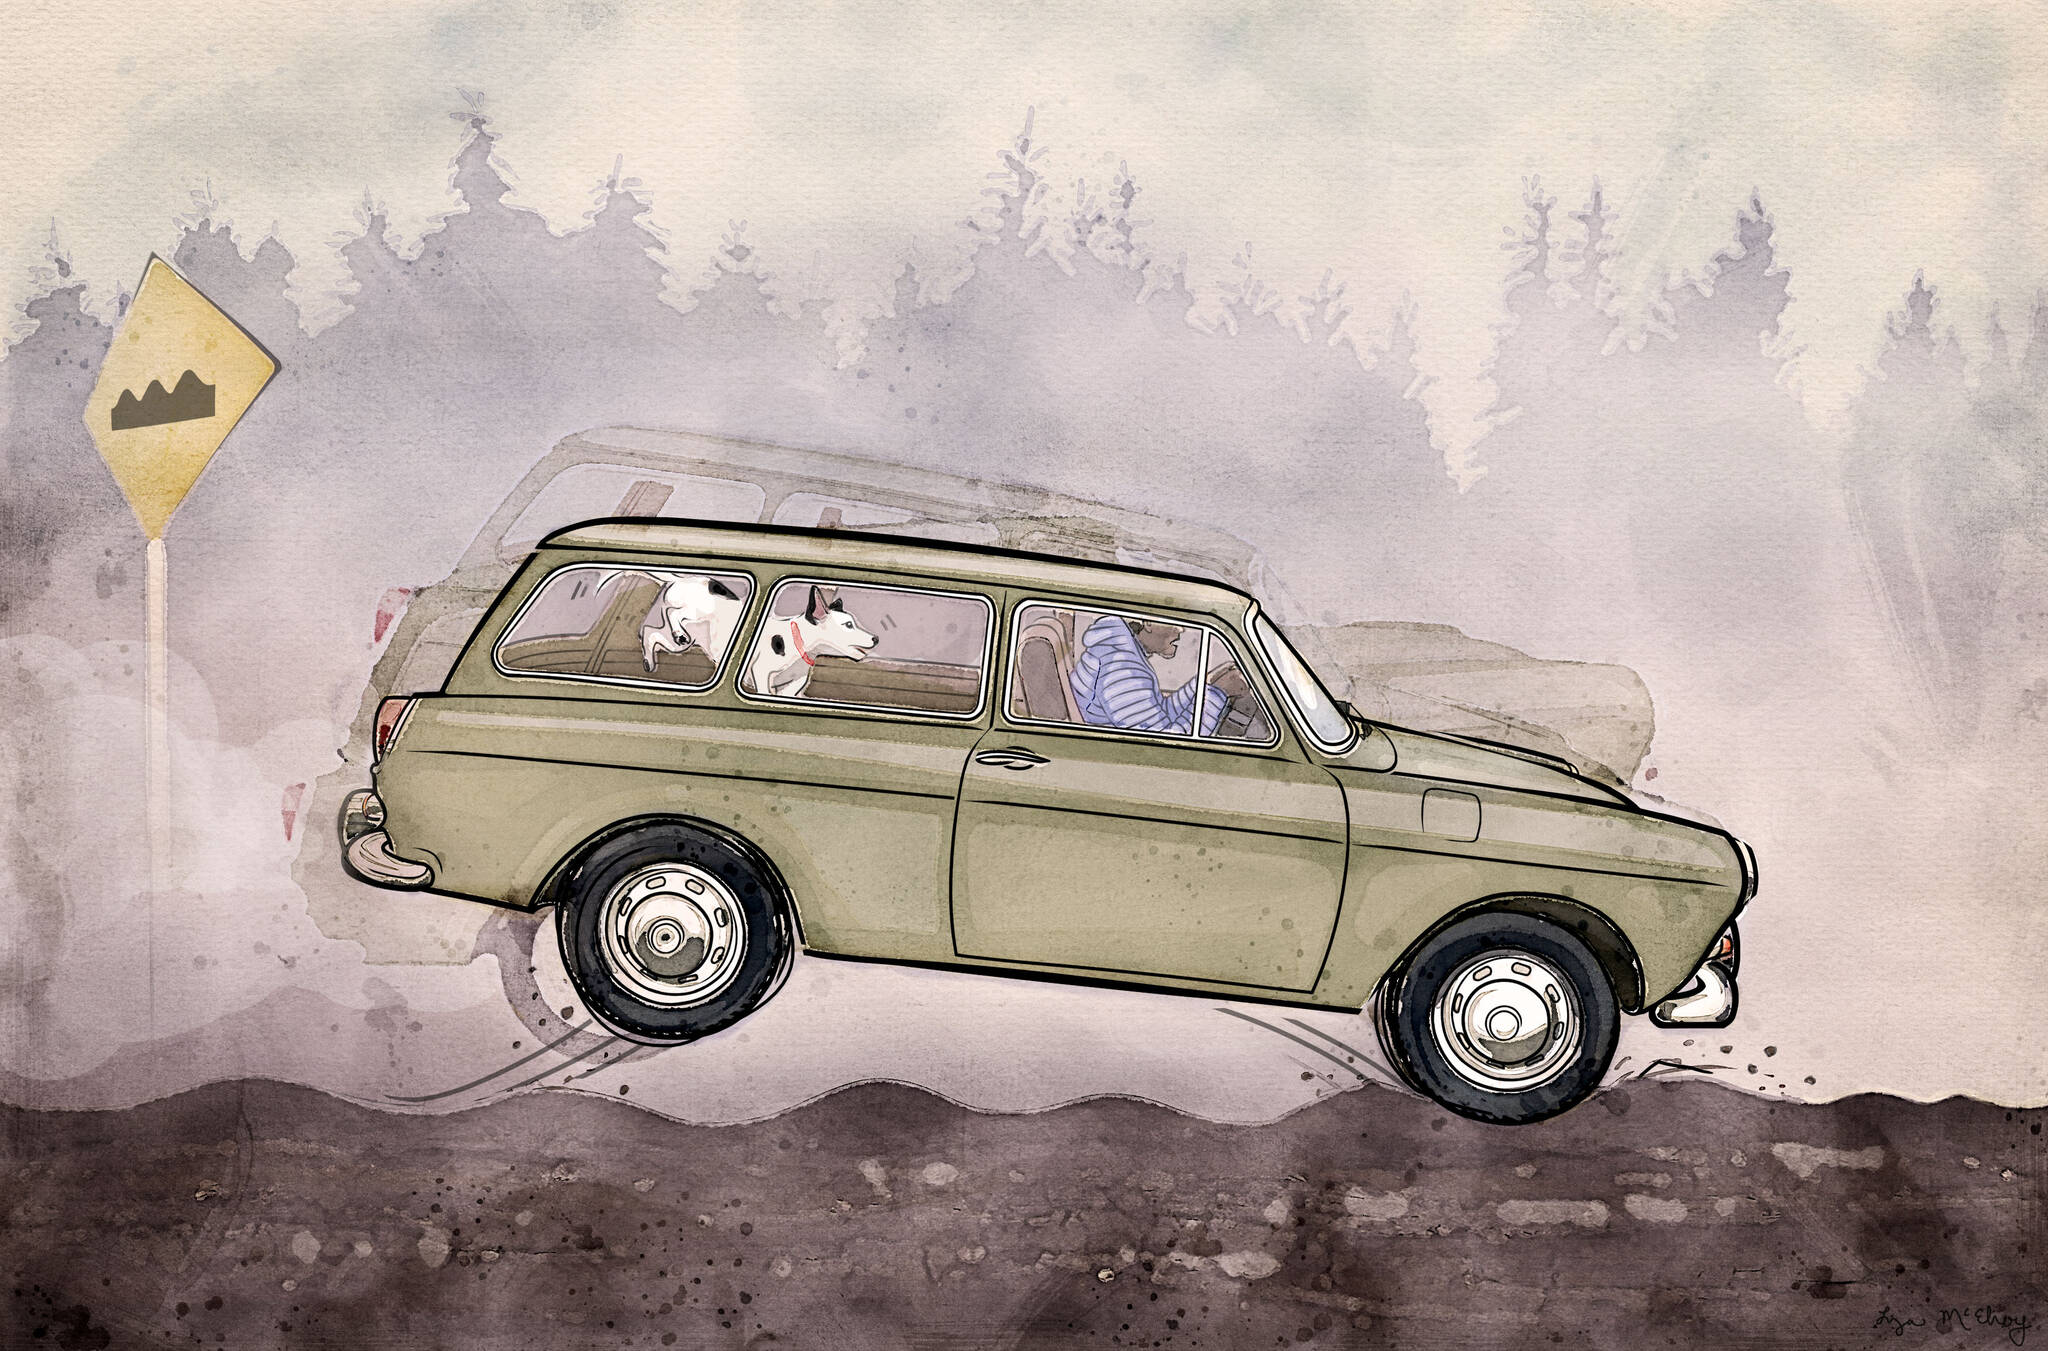 Washboard roads form on dry, unpaved road surfaces, of which there are many in Alaska. (Illustration by Liza McElroy)